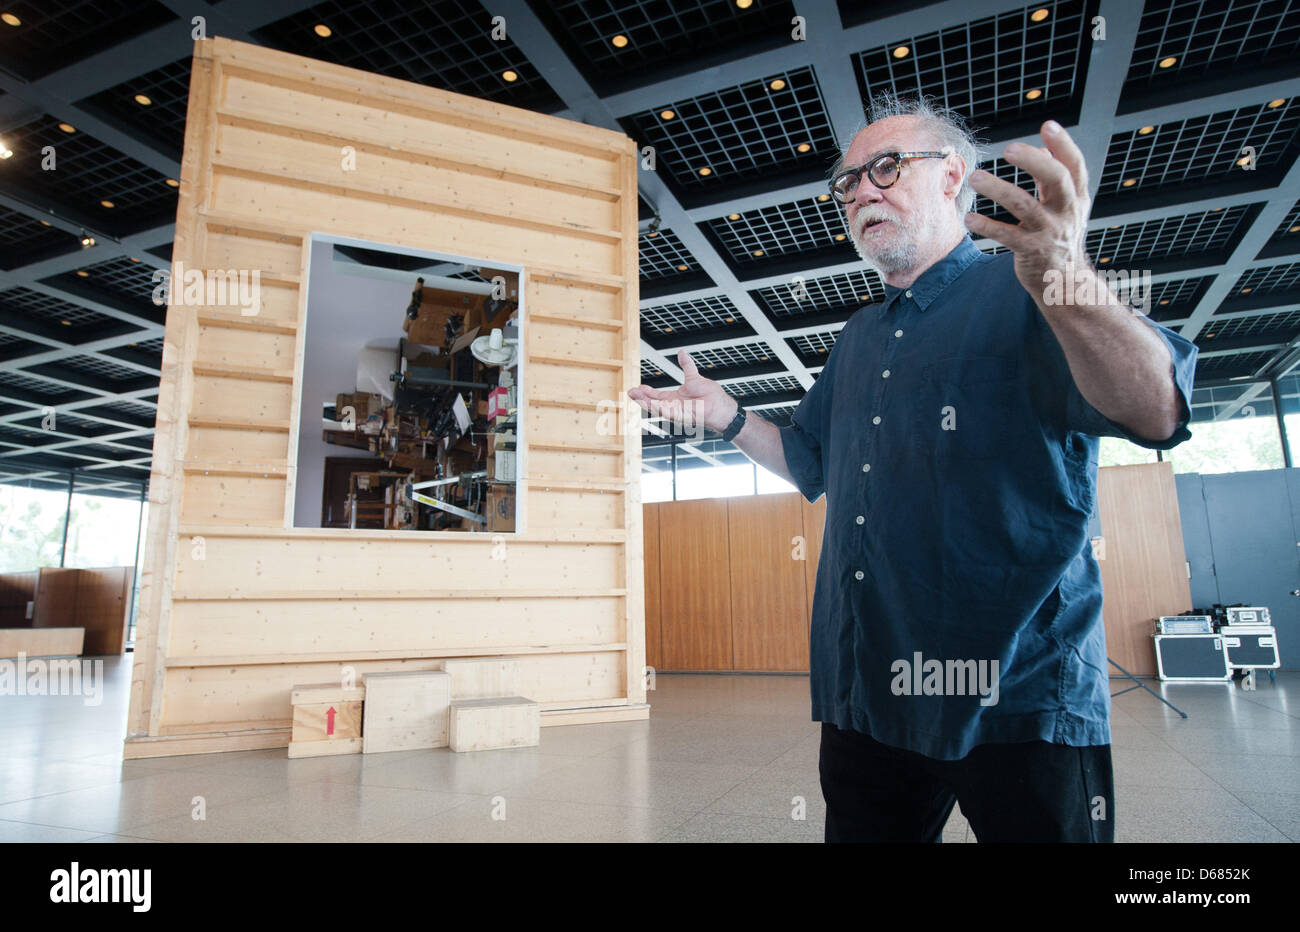 US artist Paul McCarthy presents his work 'The Box' at the Neue Nationalgalerie (New National Gallery) in Berlin, Germany, 05 July 2012. His work will be presented at the venue until 04 November 2012. Photo: Maurizio Gambarini Stock Photo